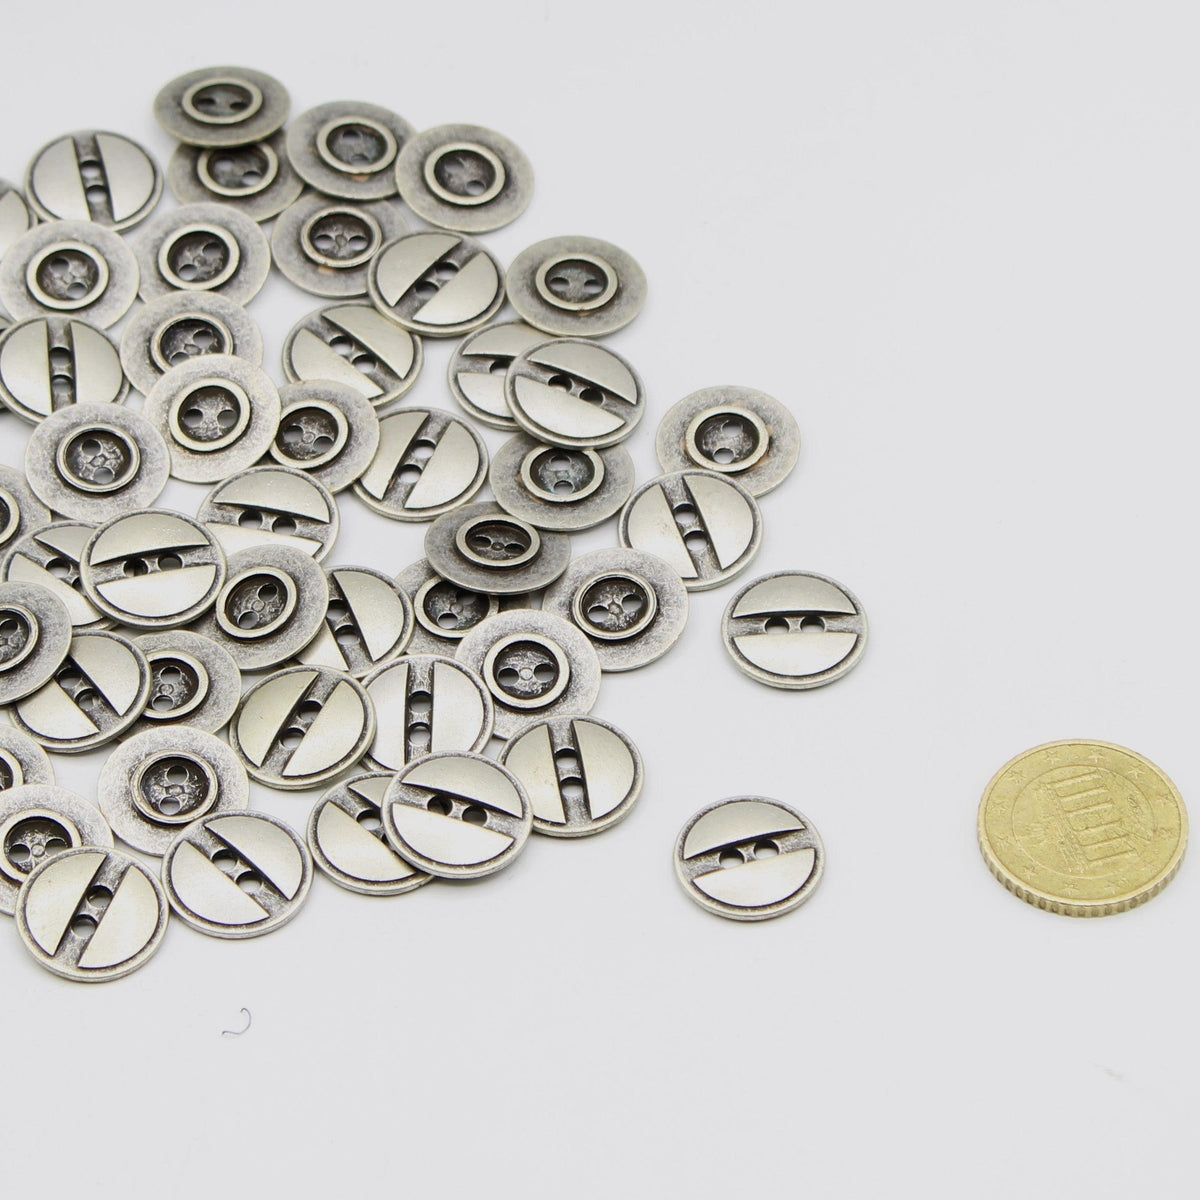 18mm- Thin Metal Zamak BUTTONS with two Holes, colour Old Silver #KZ2100 - ACCESSOIRES LEDUC BV